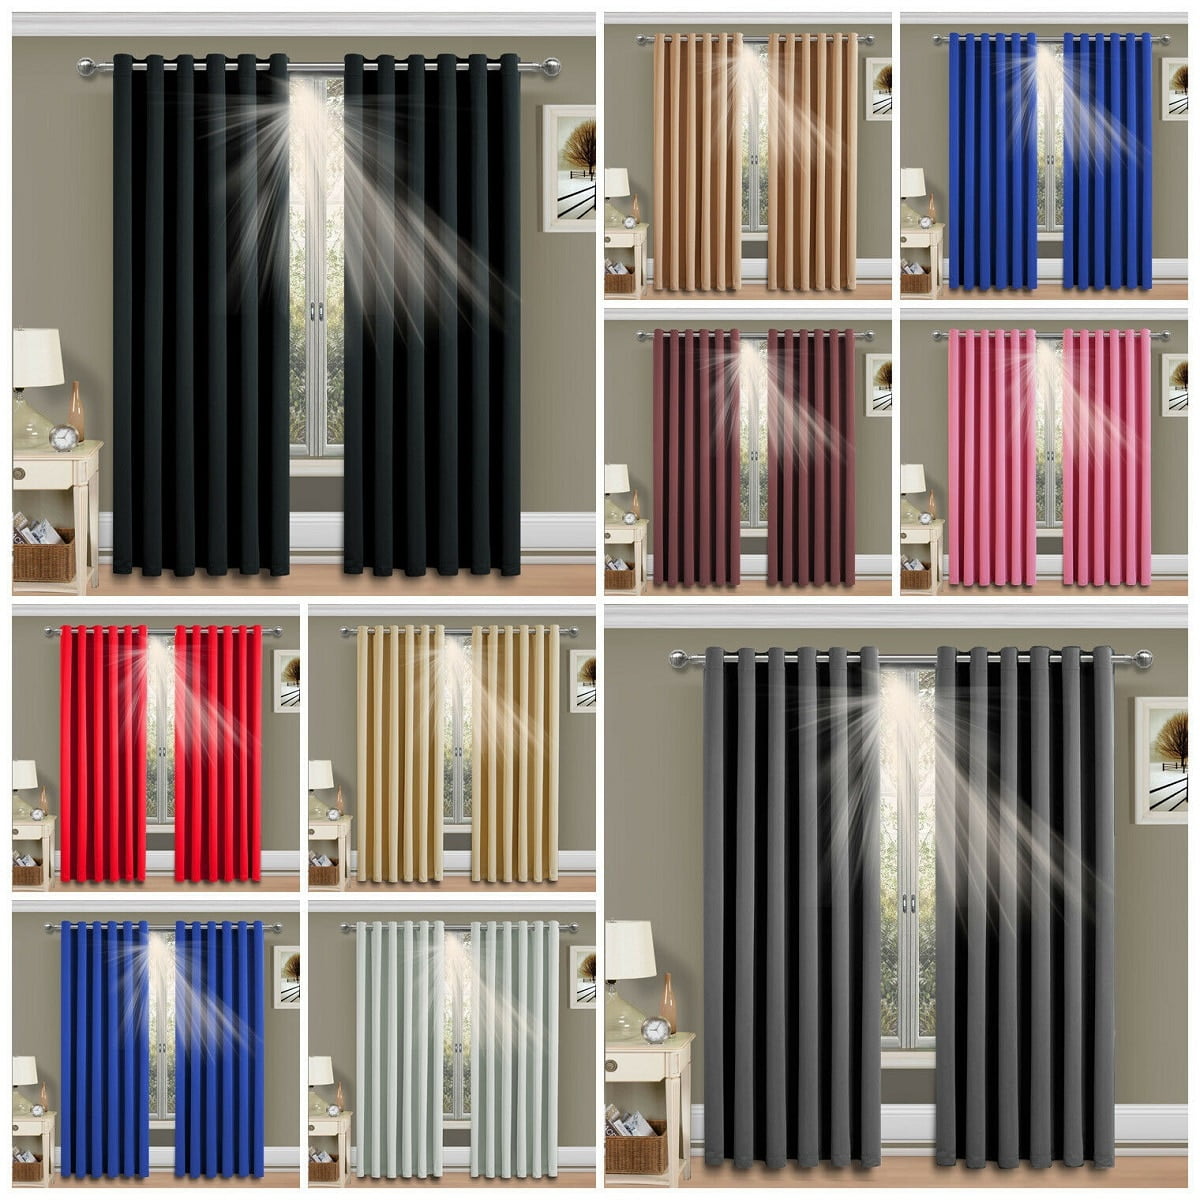 Dimout Energy Saving Thermal Blackout Curtains Ready Made Eyelet Curtains 